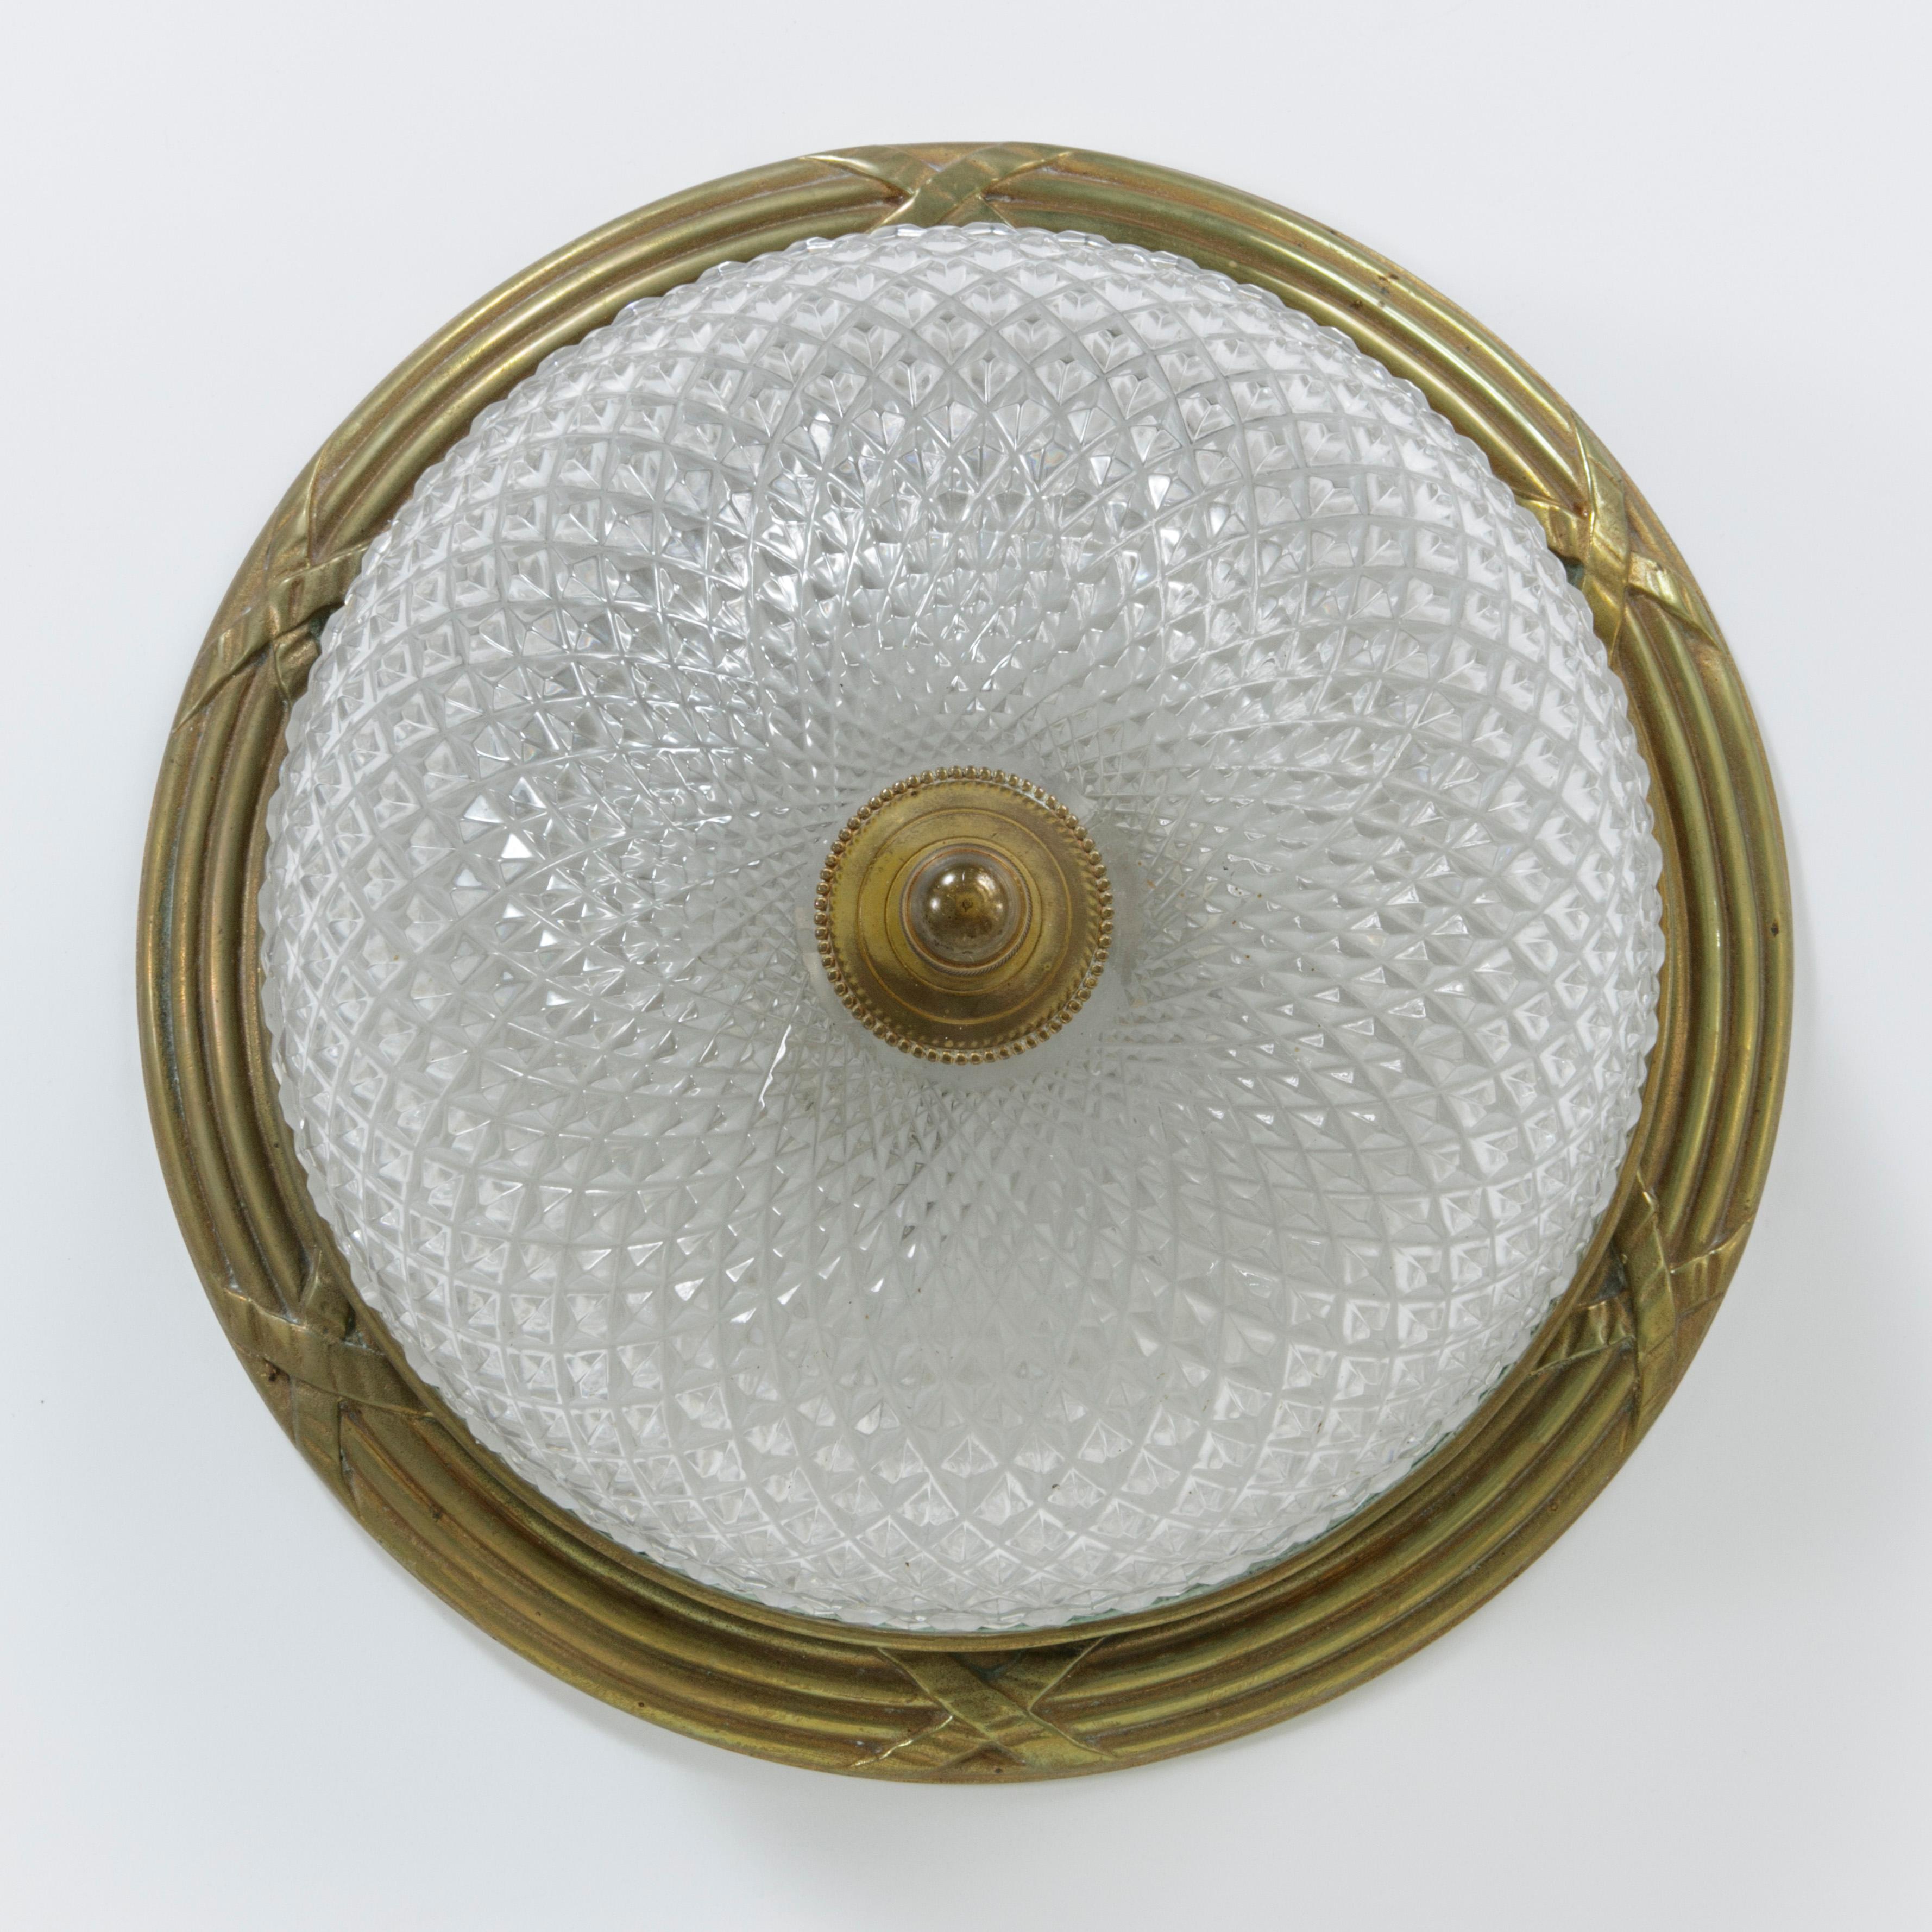 This French flush mount ceiling light from the mid-20th century features a multifaceted crystal dome trimmed with a pierced gilt bronze gallery and held in place with a bronze acorn finial. The rim around the mount is detailed with a Classic Louis